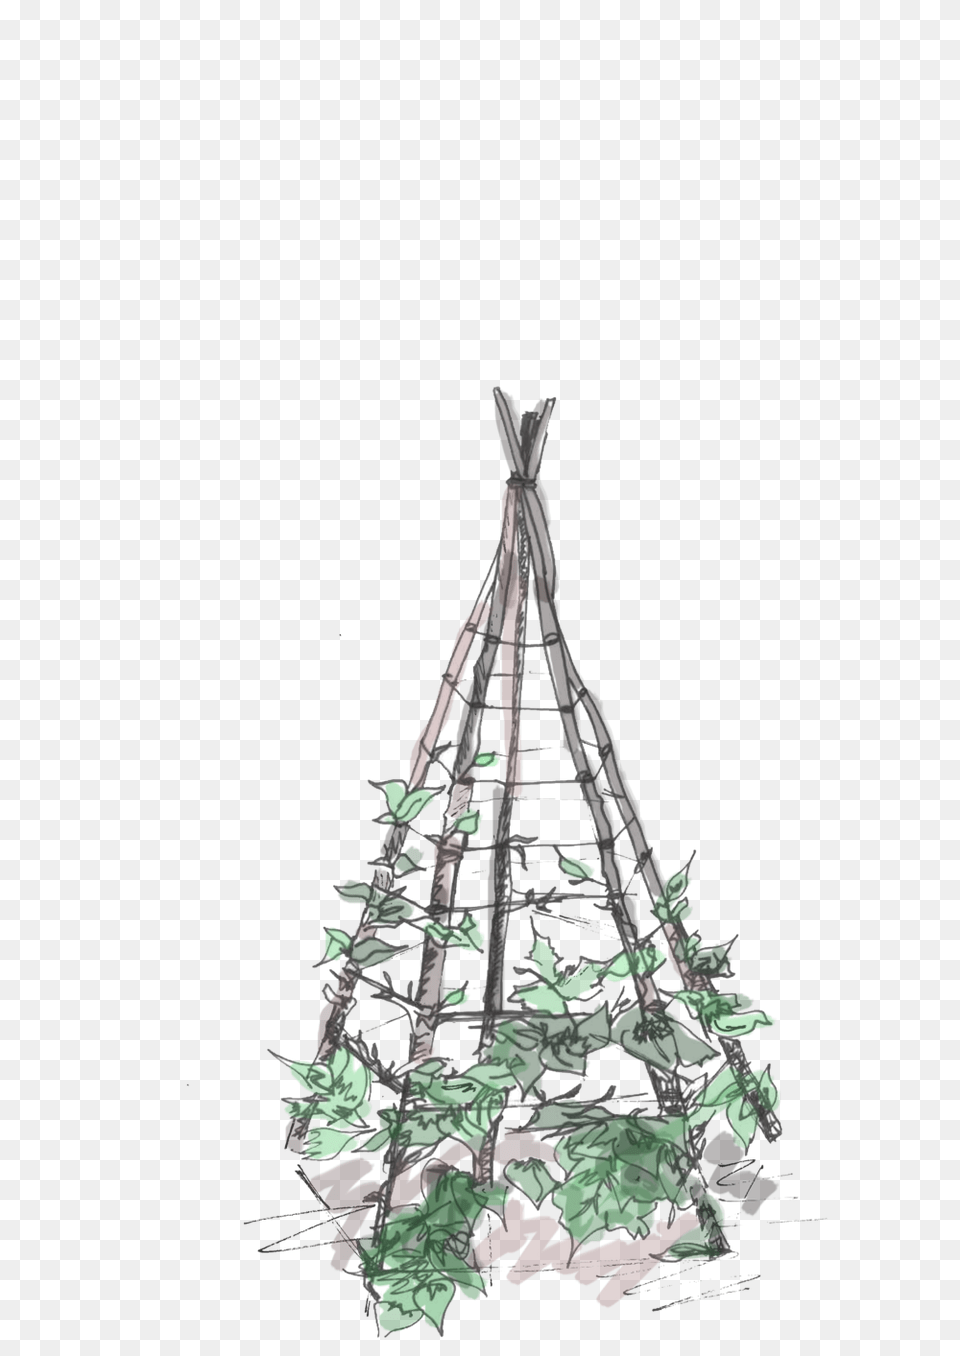 Download Hd Plant Teepee Transparent Nicepngcom Christmas Tree, Potted Plant, Art, Chandelier, Lamp Png Image